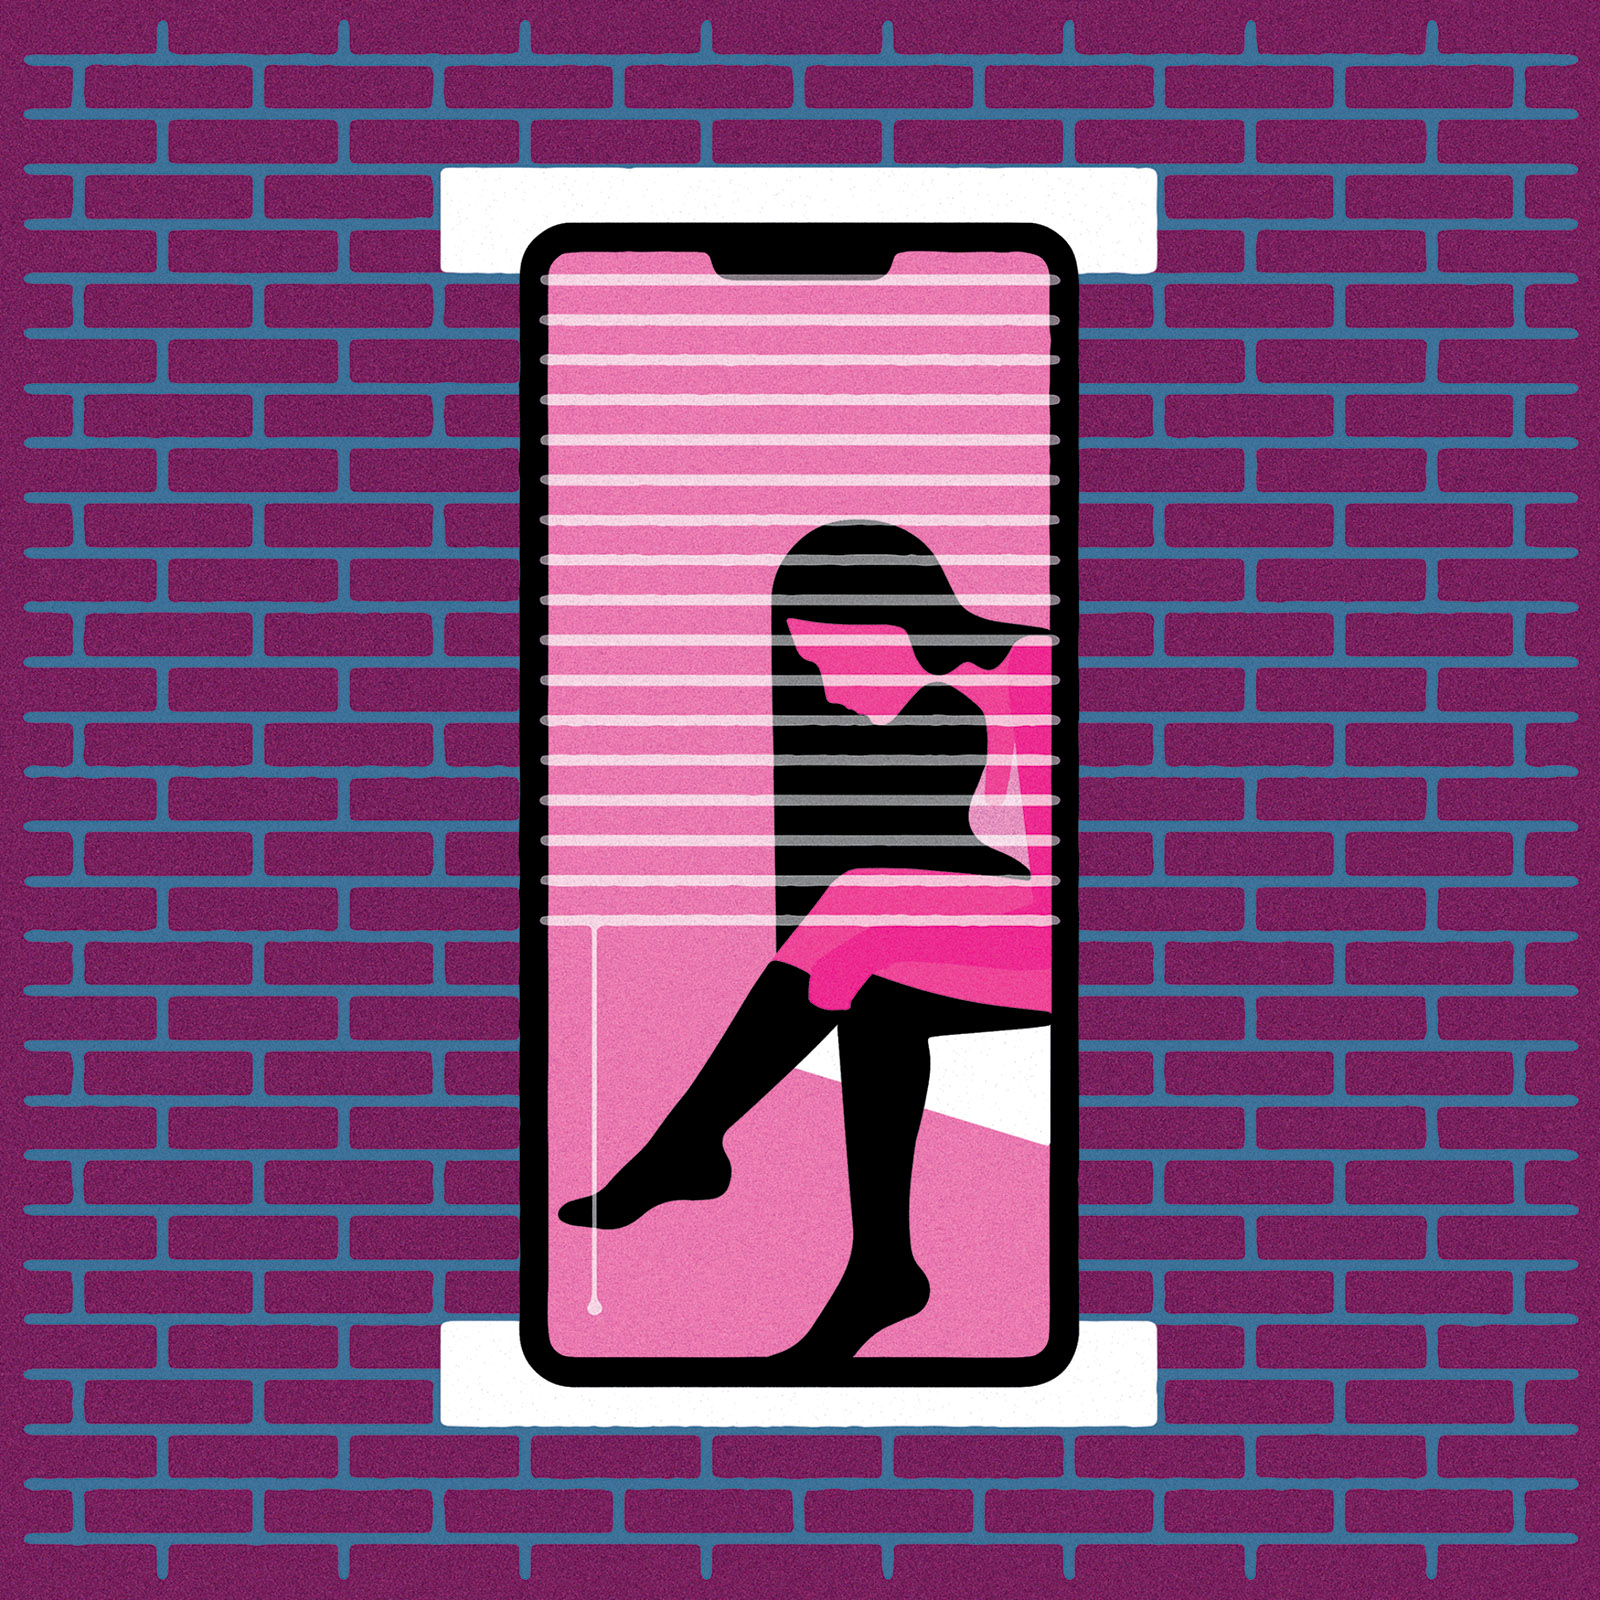 Window shaped like a smart phone with a woman dressing on the screen